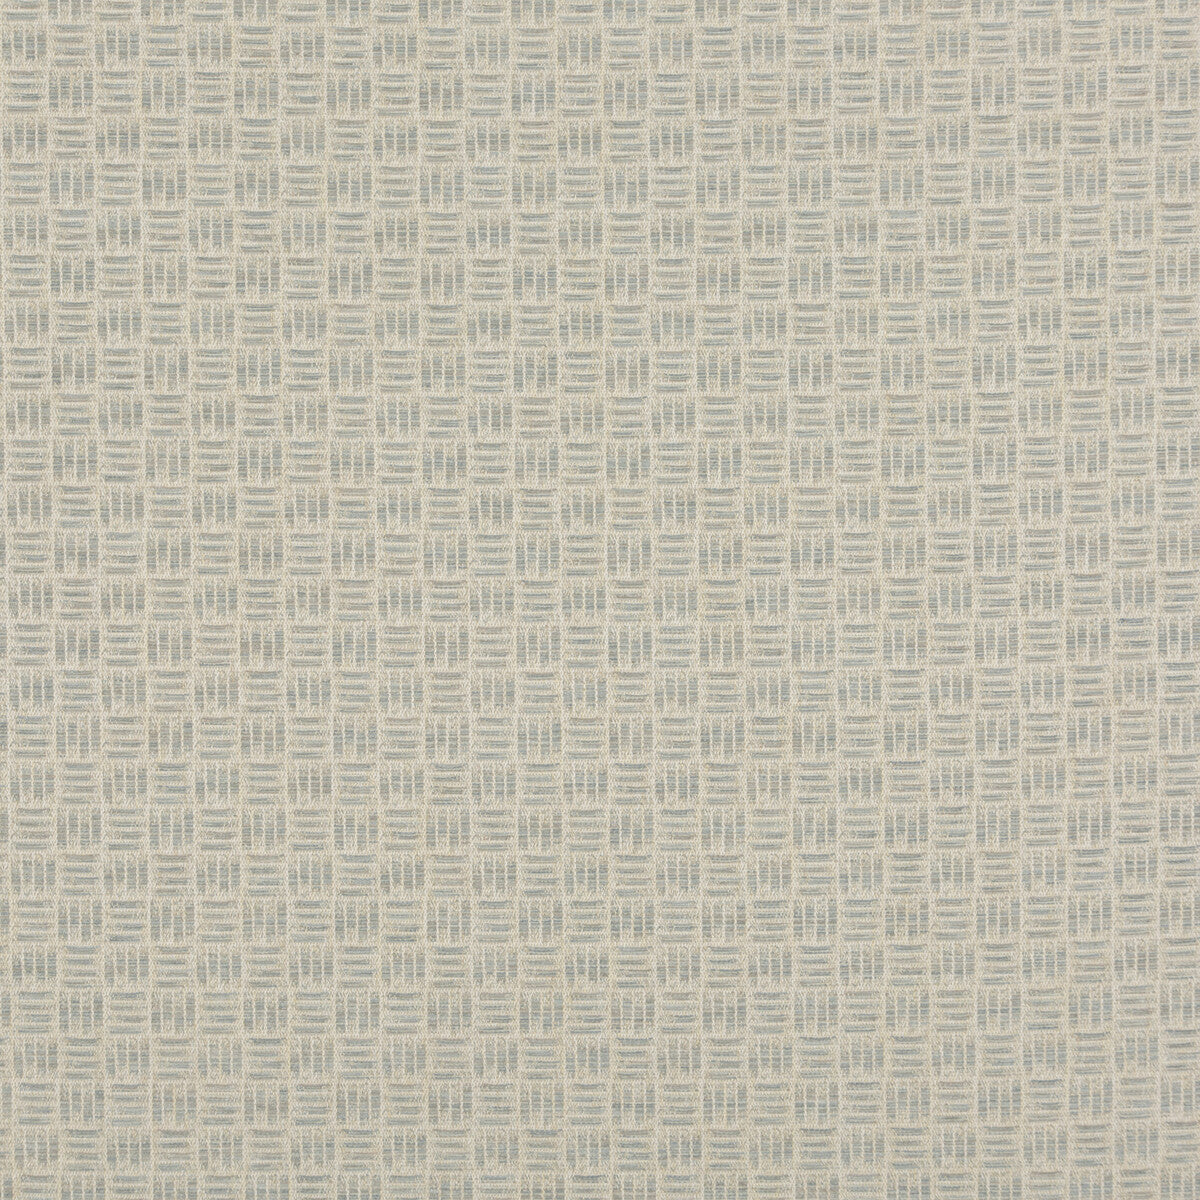 Seismic fabric in sea foam color - pattern BF10687.721.0 - by G P &amp; J Baker in the Essential Colours collection